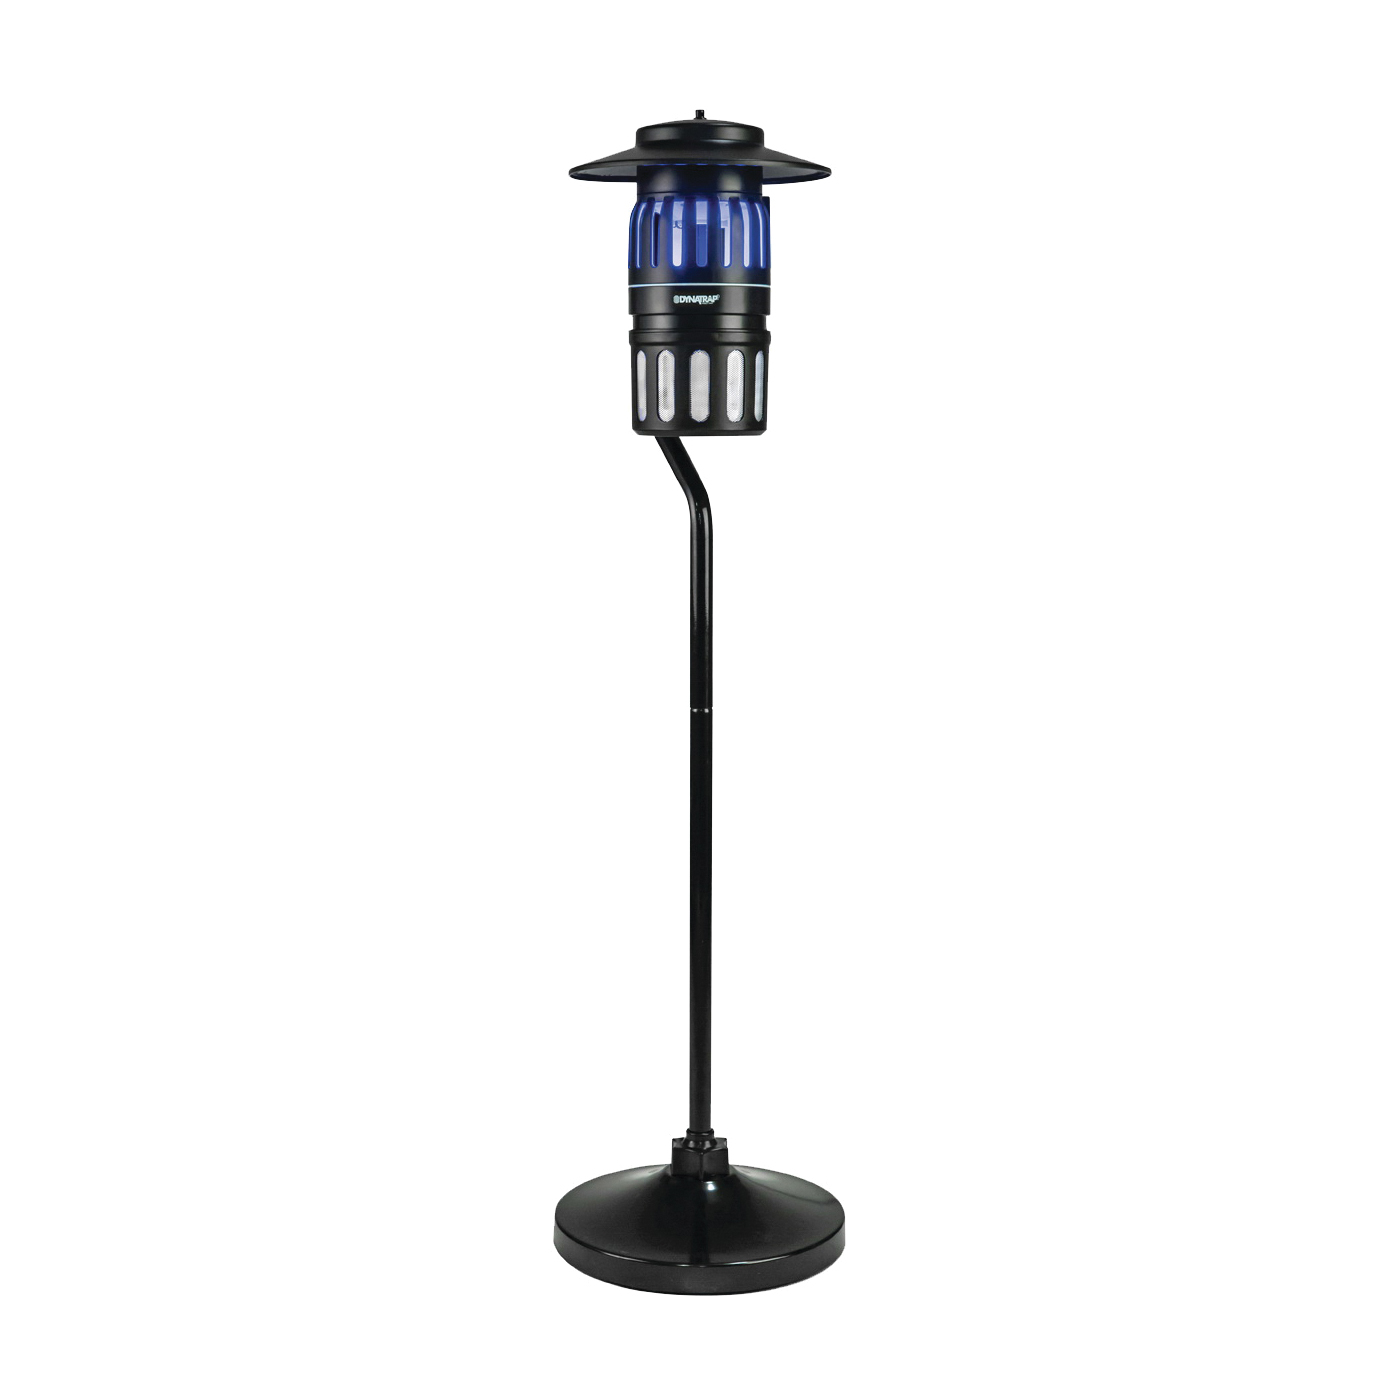 DT1260 Insect Trap with Pole, 110 V, 15 W, Fluorescent Lamp, Black